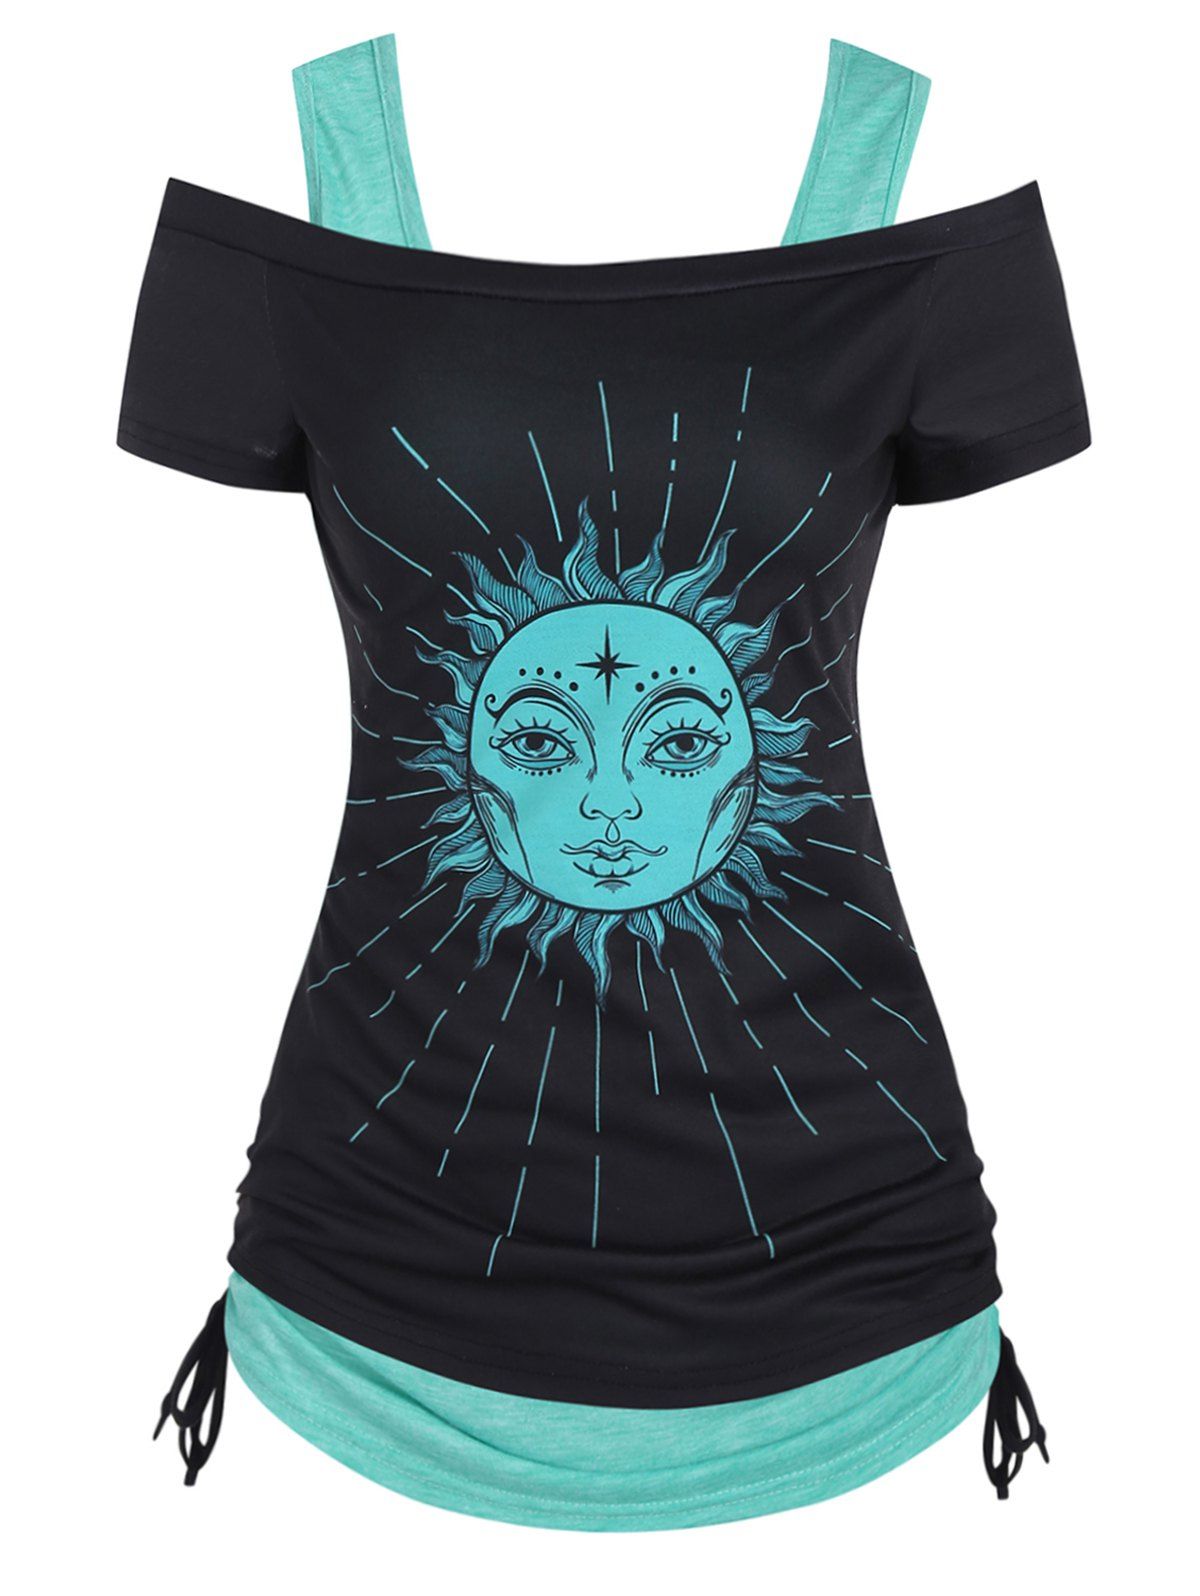 Celestial Sun Off The Shoulder T Shirt And Cinched Heathered Tank Top Two Piece Set - BLACK S